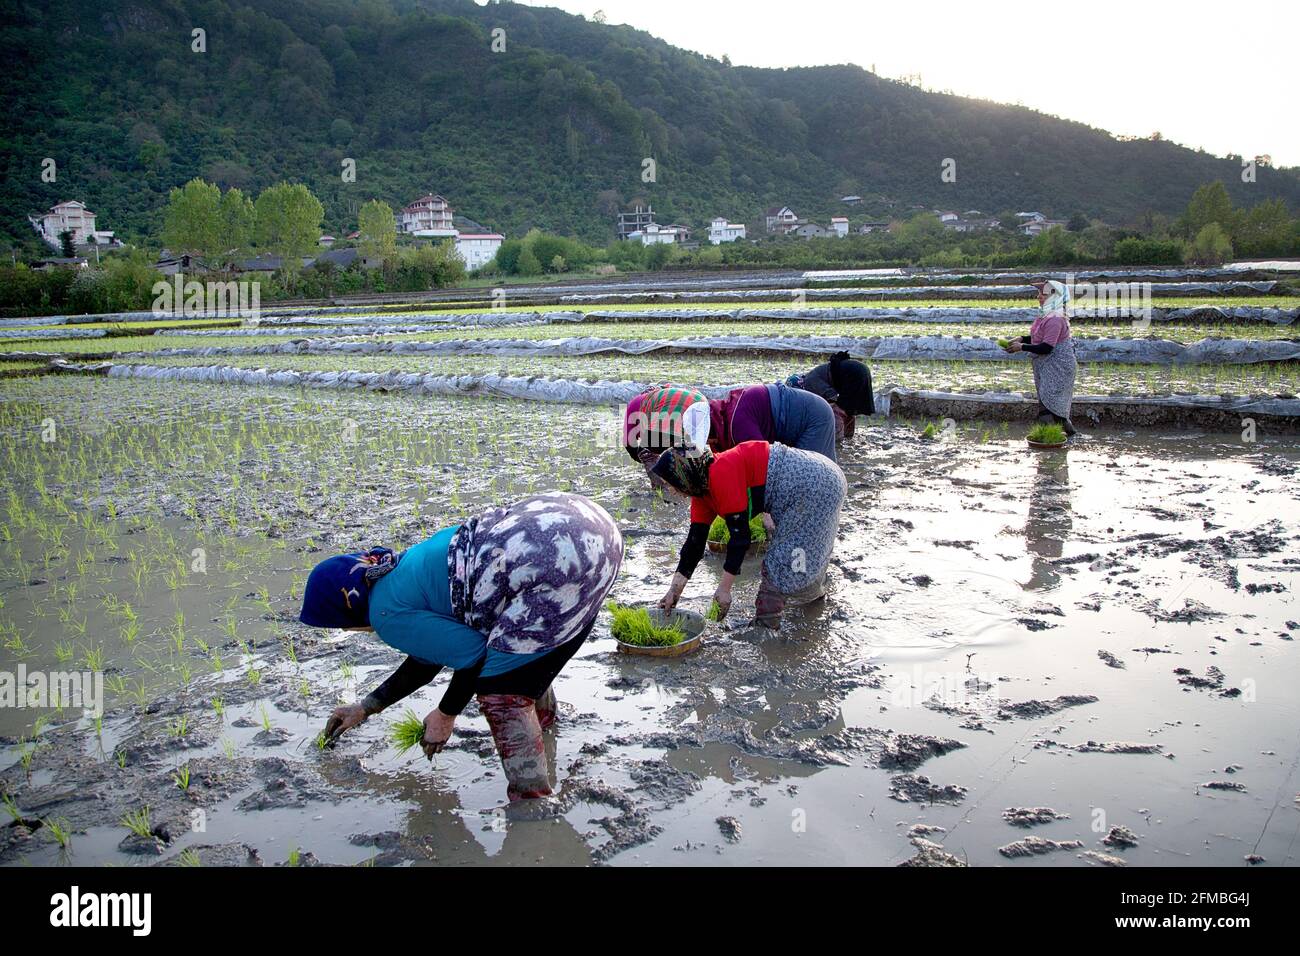 During the cultivation period, women in rubber boots stand almost knee-deep in water and mud on the rice field and plant the tufts of rice one by one in the muddy ground - sometimes at 40 degrees Celsius and high humidity Stock Photo